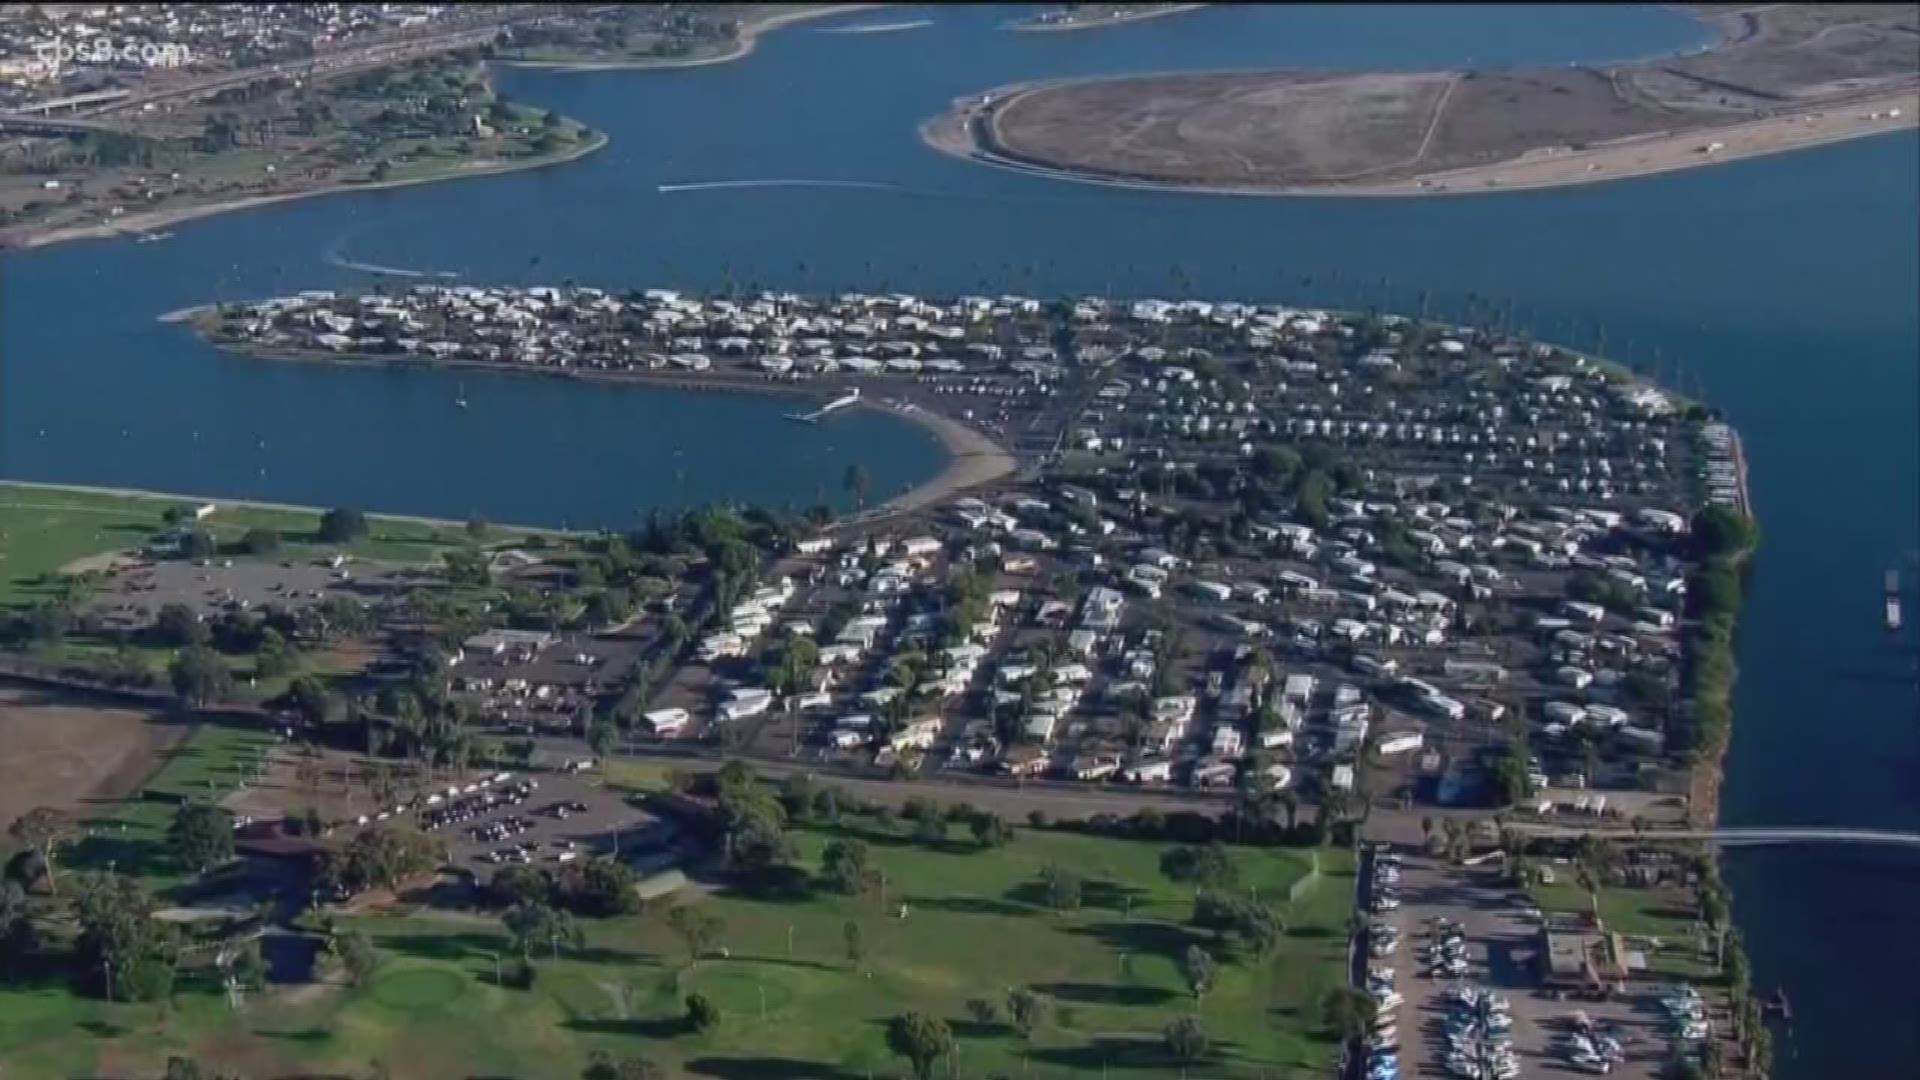 The city of San Diego has offered to extend the lease for Campland RV park while plans to revitalize the 166 acres of De Anza Cove are finalized.